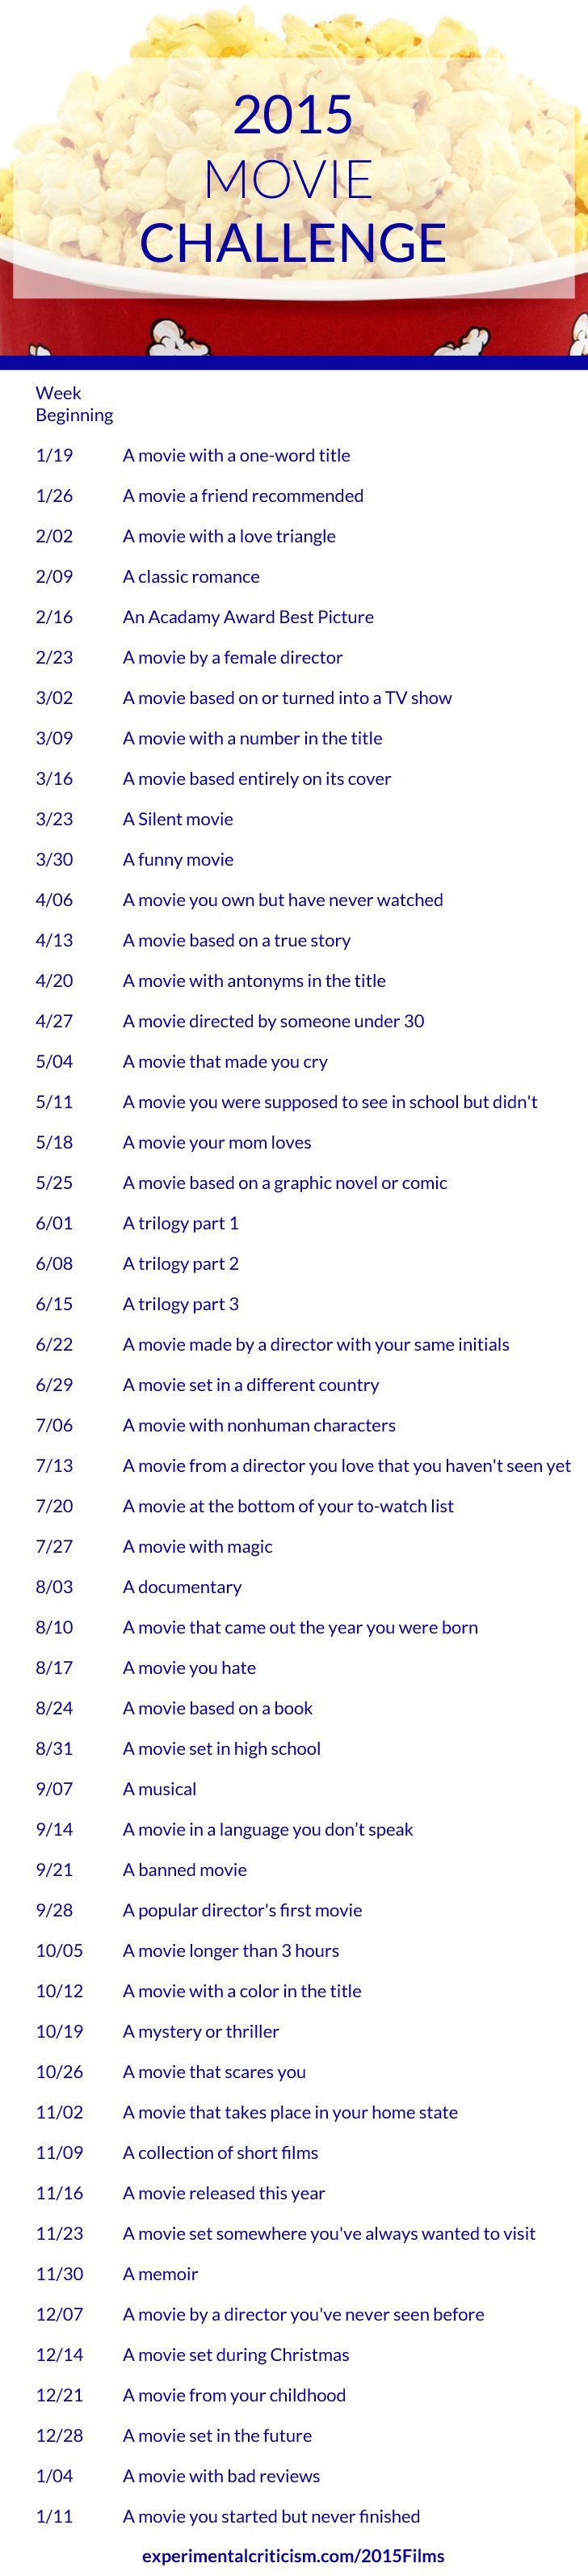 Movie Challenge 2015! This is a challenge for people who love movies, but do not have the time to watch them. The goal is for